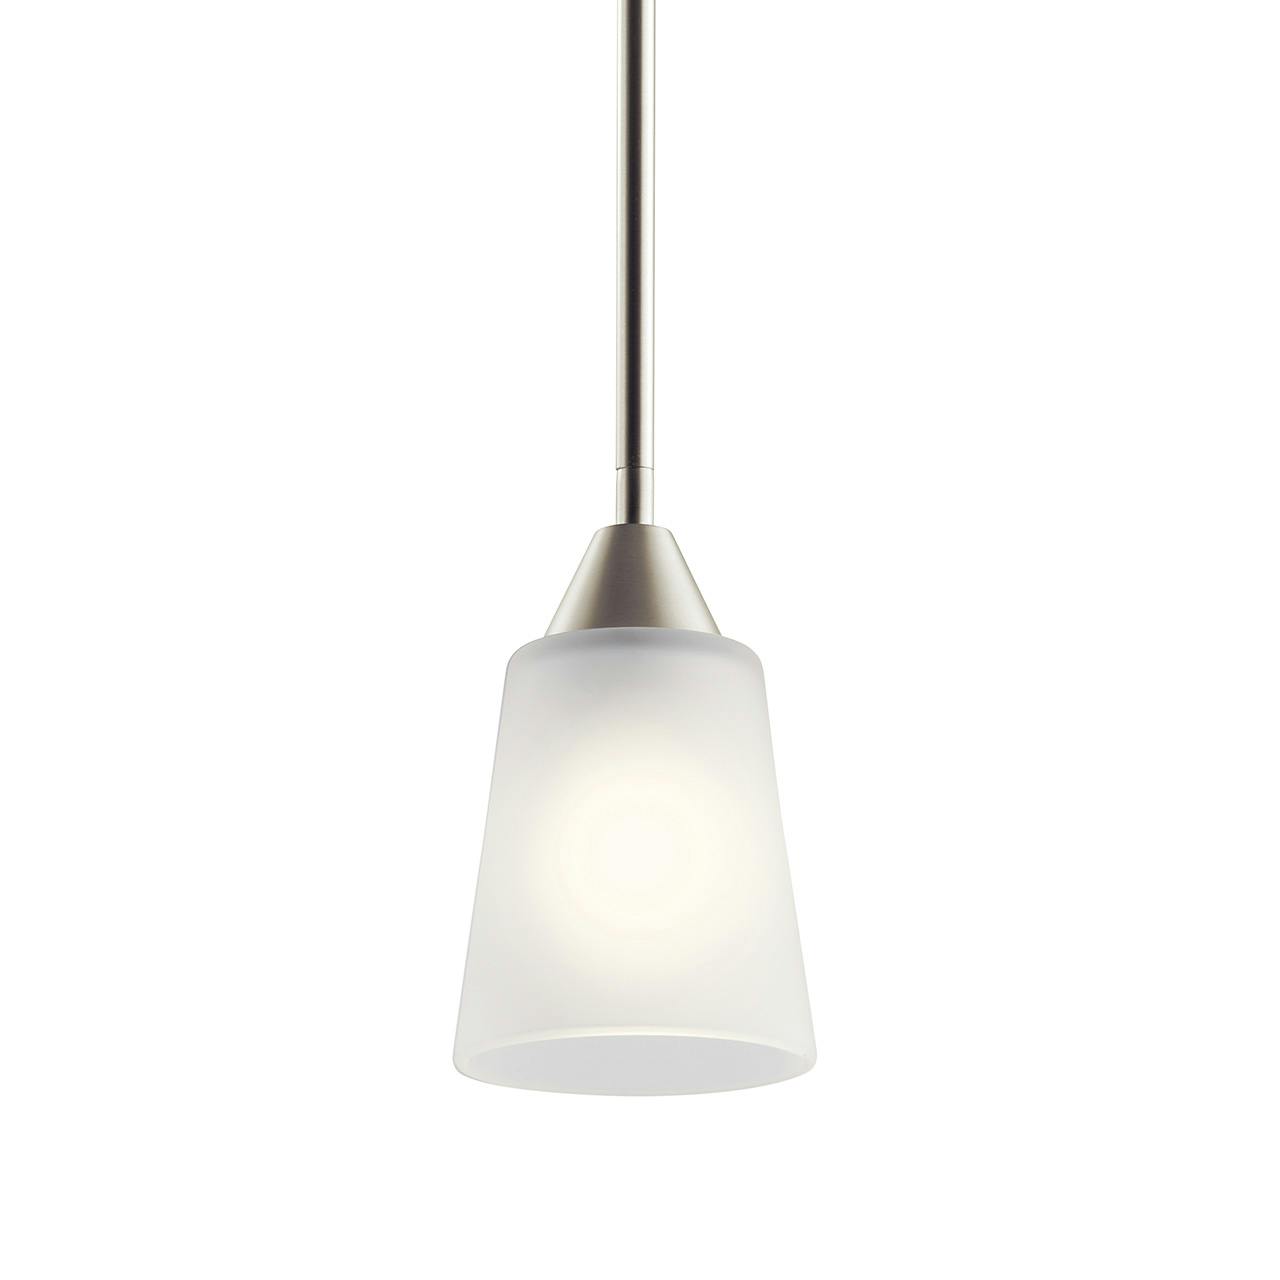 Skagos 1 Light Mini Pendant Nickel without the canopy on a white background